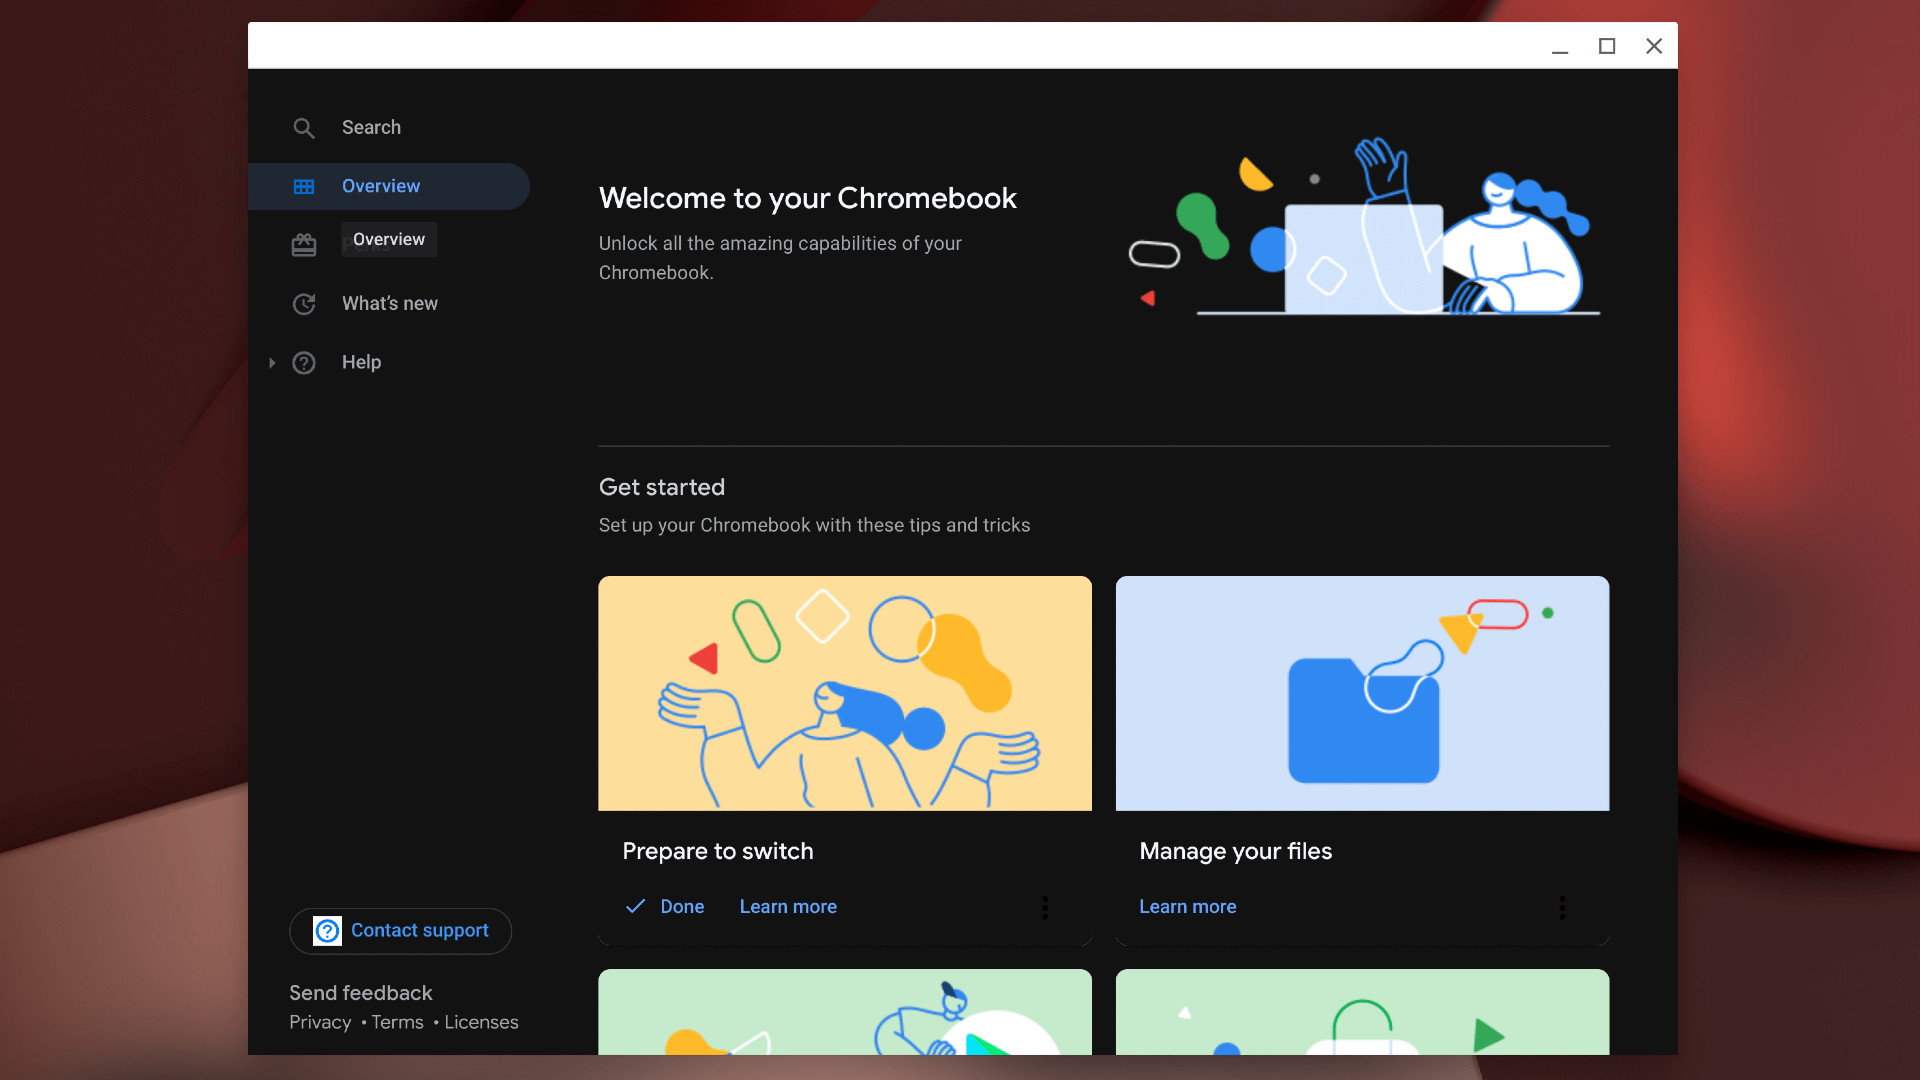 Chrome OS dark mode: Here's how to enable it